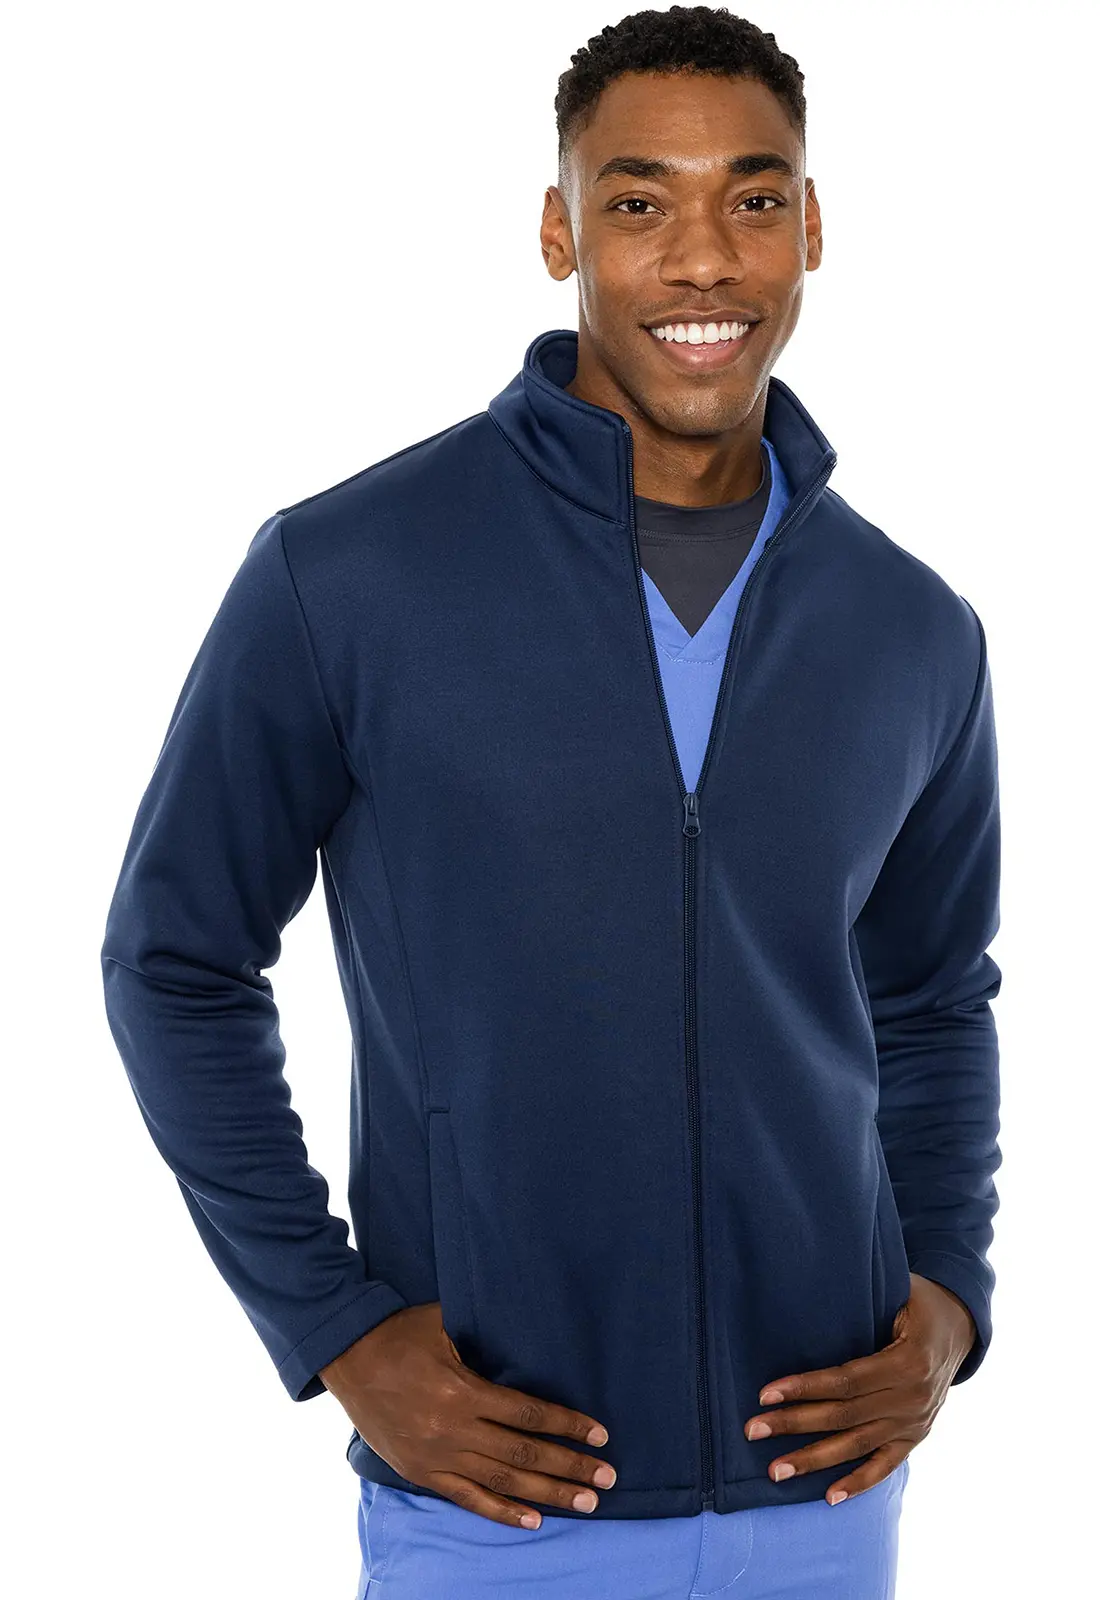  Infinity Men's Zip Front Jacket Modern Fit Rib-knit Panels with  3 Pockets and Knit Sleeve Panel CK332A, XS, Caribbean Blue: Clothing, Shoes  & Jewelry